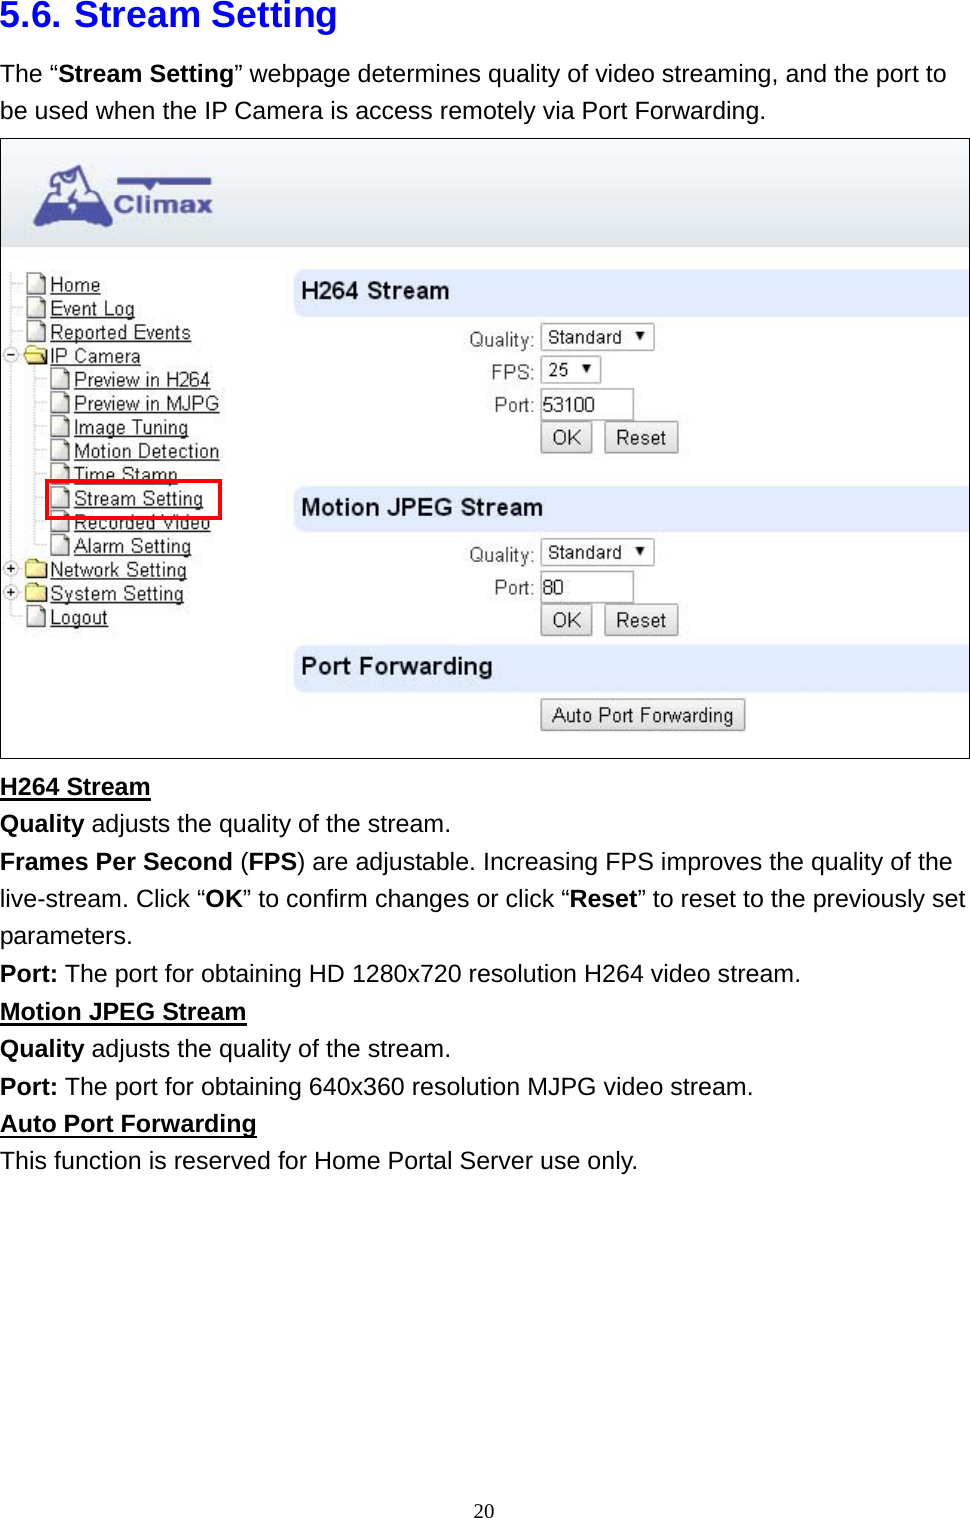 20  5.6. Stream Setting The “Stream Setting” webpage determines quality of video streaming, and the port to be used when the IP Camera is access remotely via Port Forwarding.  H264 Stream Quality adjusts the quality of the stream. Frames Per Second (FPS) are adjustable. Increasing FPS improves the quality of the live-stream. Click “OK” to confirm changes or click “Reset” to reset to the previously set parameters. Port: The port for obtaining HD 1280x720 resolution H264 video stream. Motion JPEG Stream Quality adjusts the quality of the stream. Port: The port for obtaining 640x360 resolution MJPG video stream. Auto Port Forwarding This function is reserved for Home Portal Server use only.  